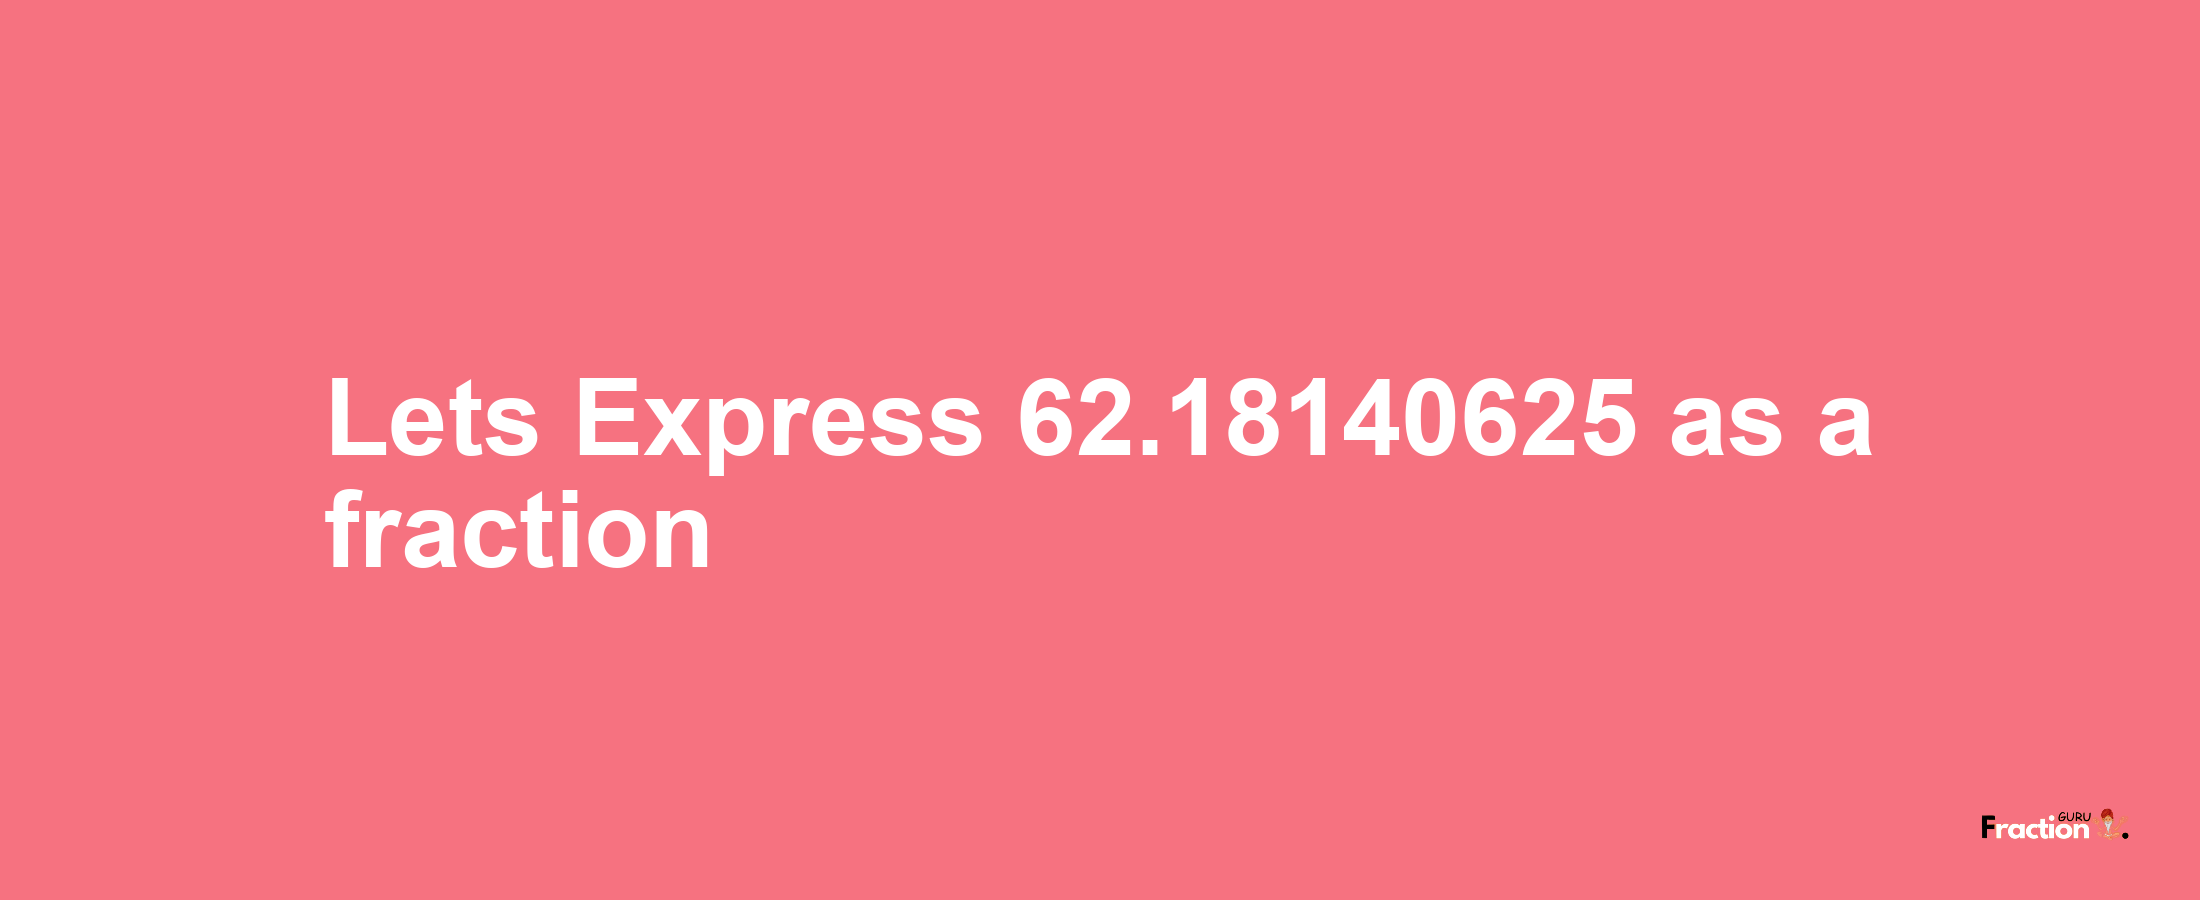 Lets Express 62.18140625 as afraction